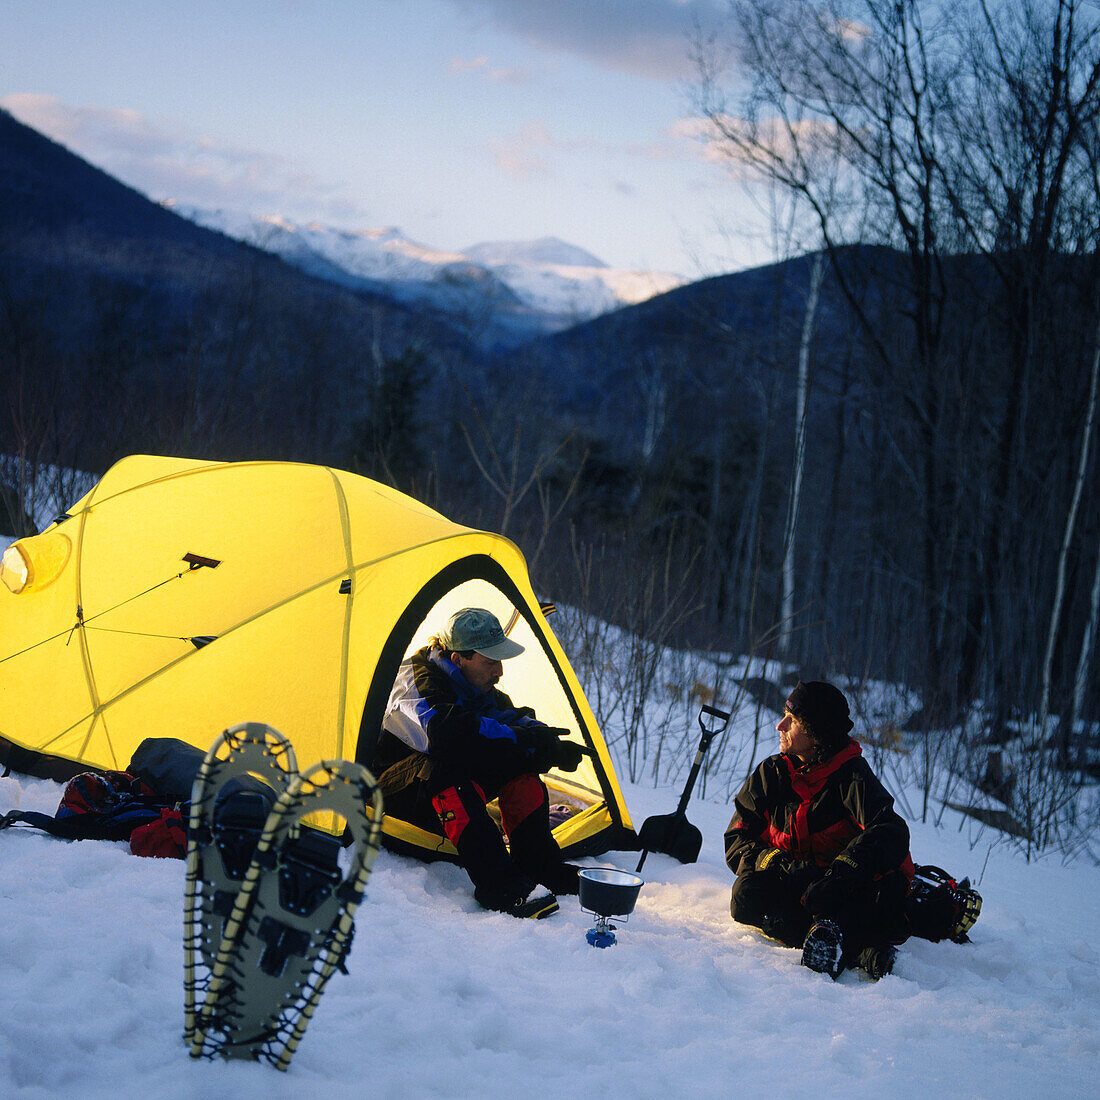 Snow camping in New Hampshire. USA